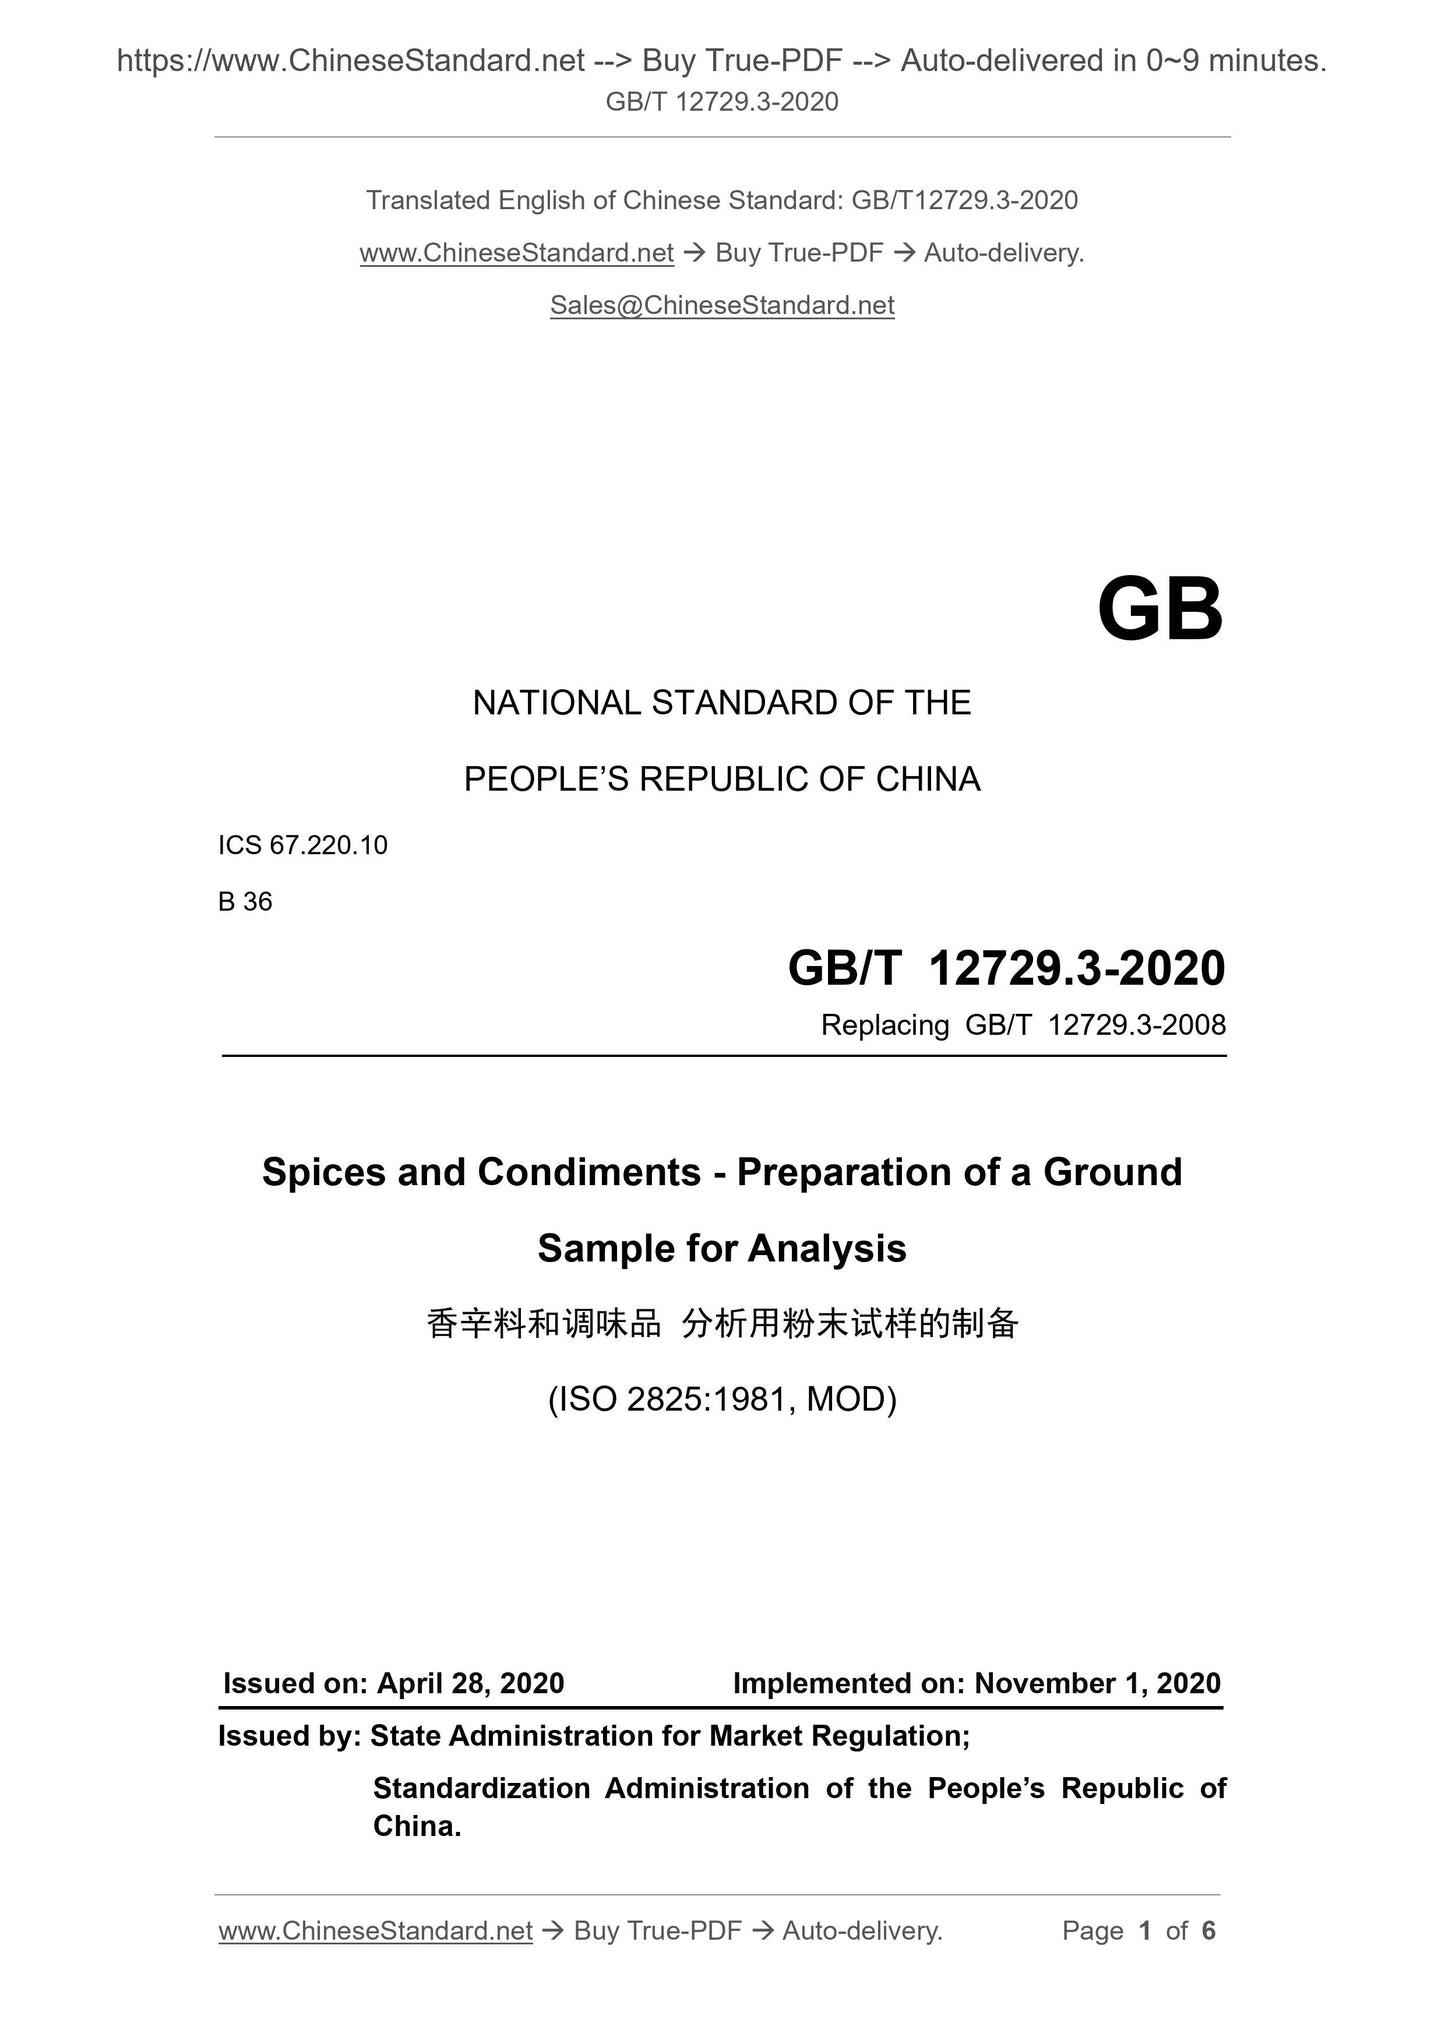 GB/T 12729.3-2020 Page 1